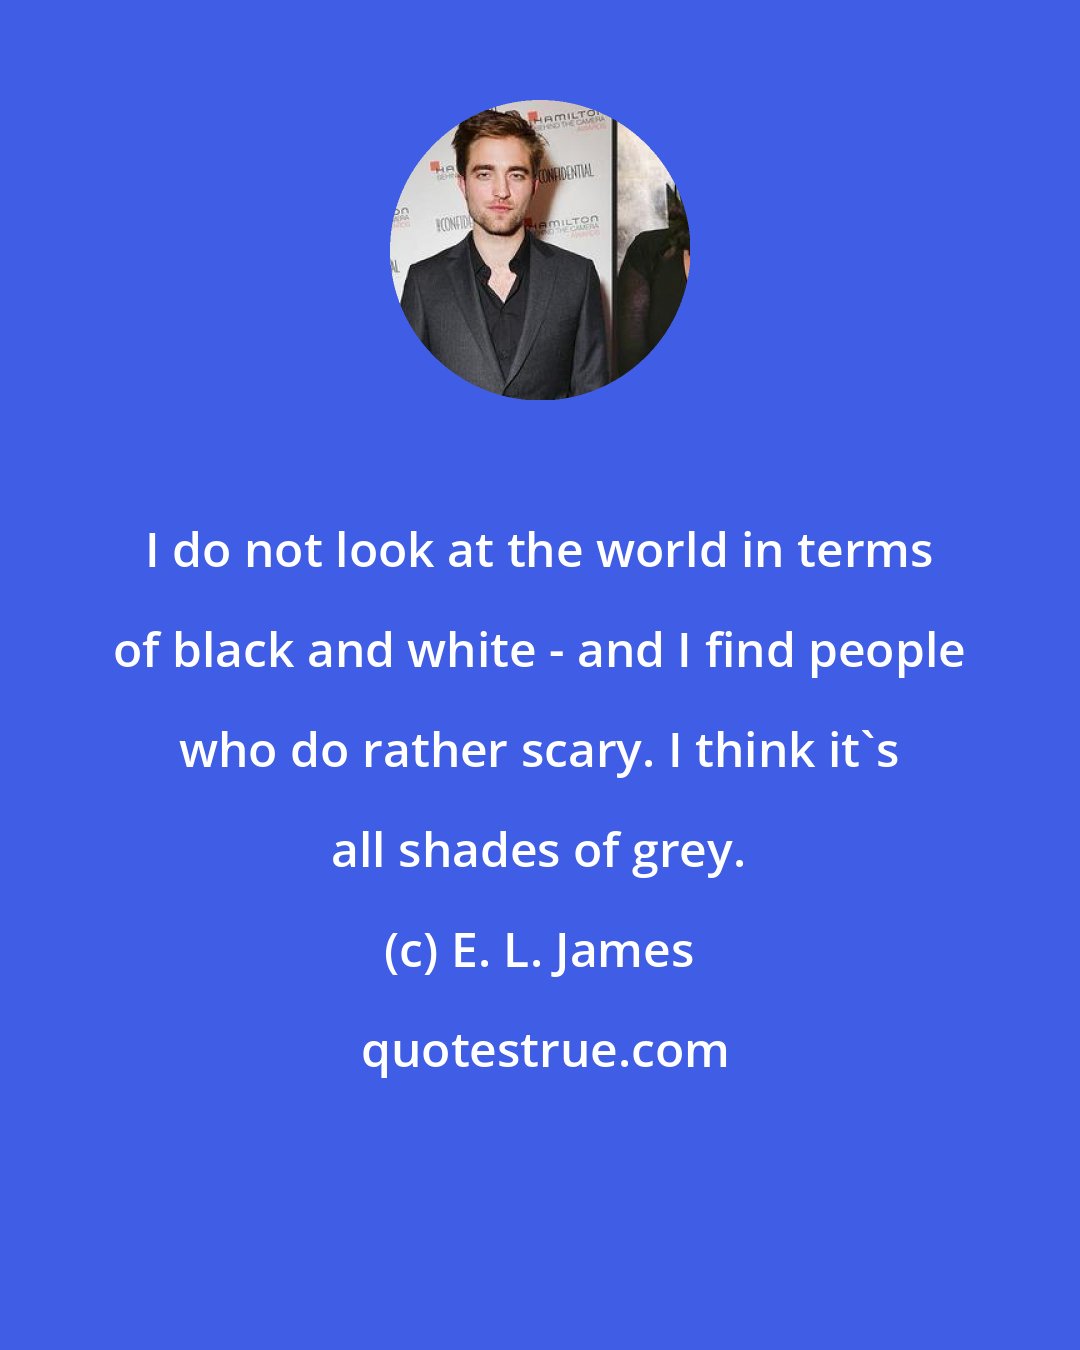 E. L. James: I do not look at the world in terms of black and white - and I find people who do rather scary. I think it's all shades of grey.